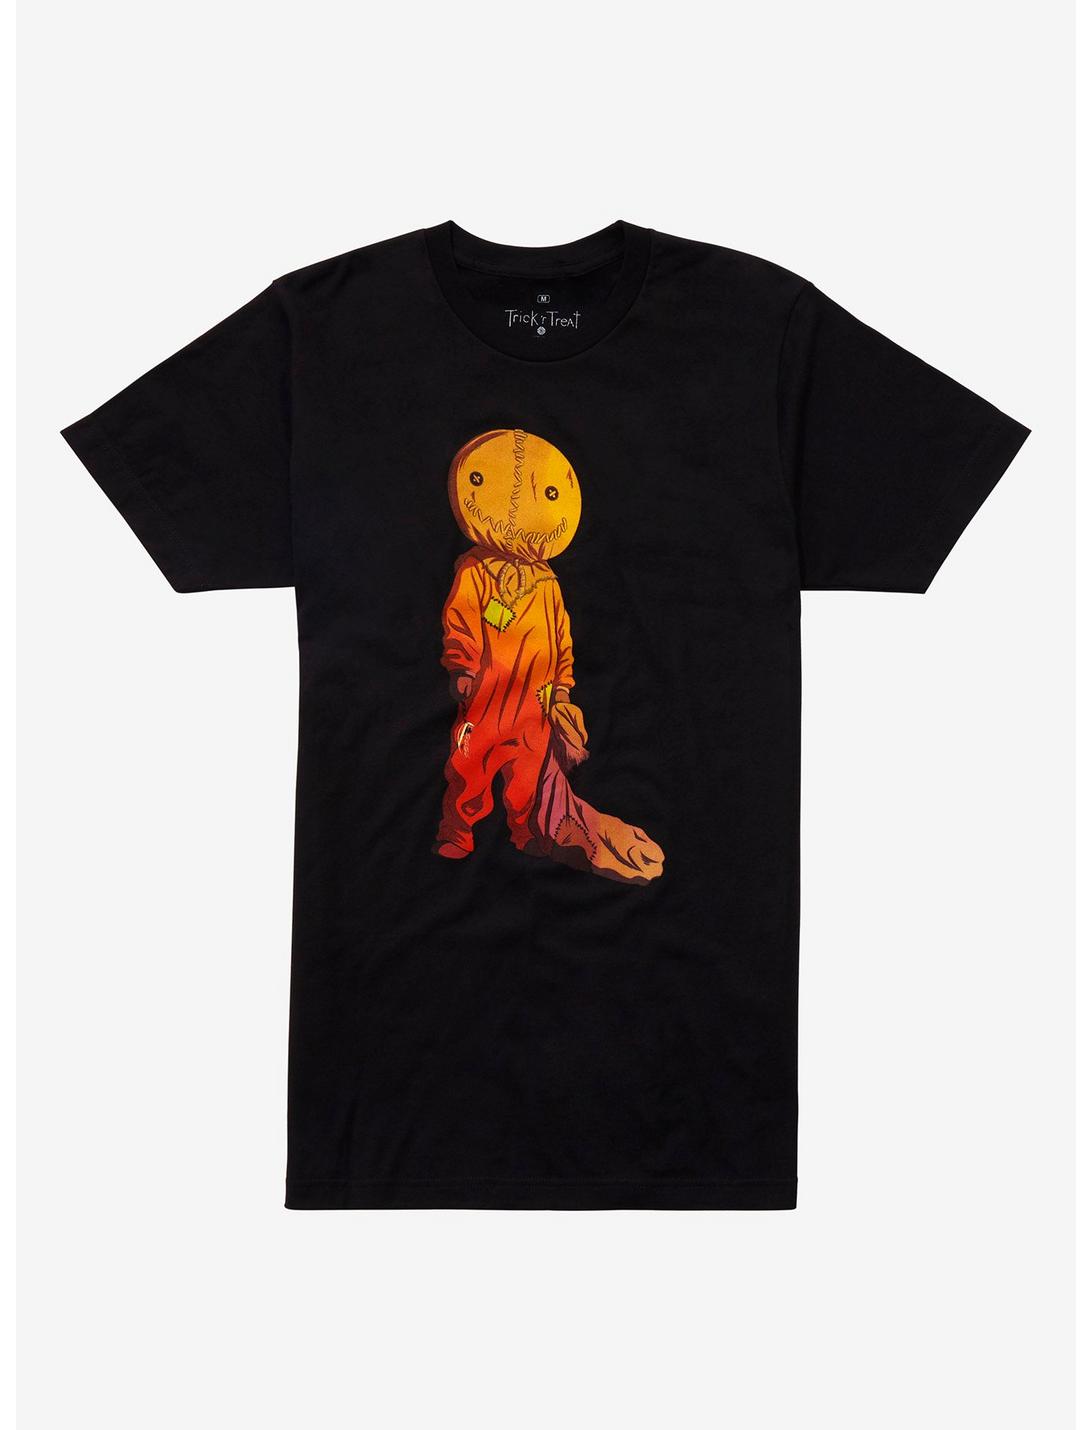 Trick'r Treat The Night Sam Came To Town Halloween Horror Unisex T-Shirt S-5XL